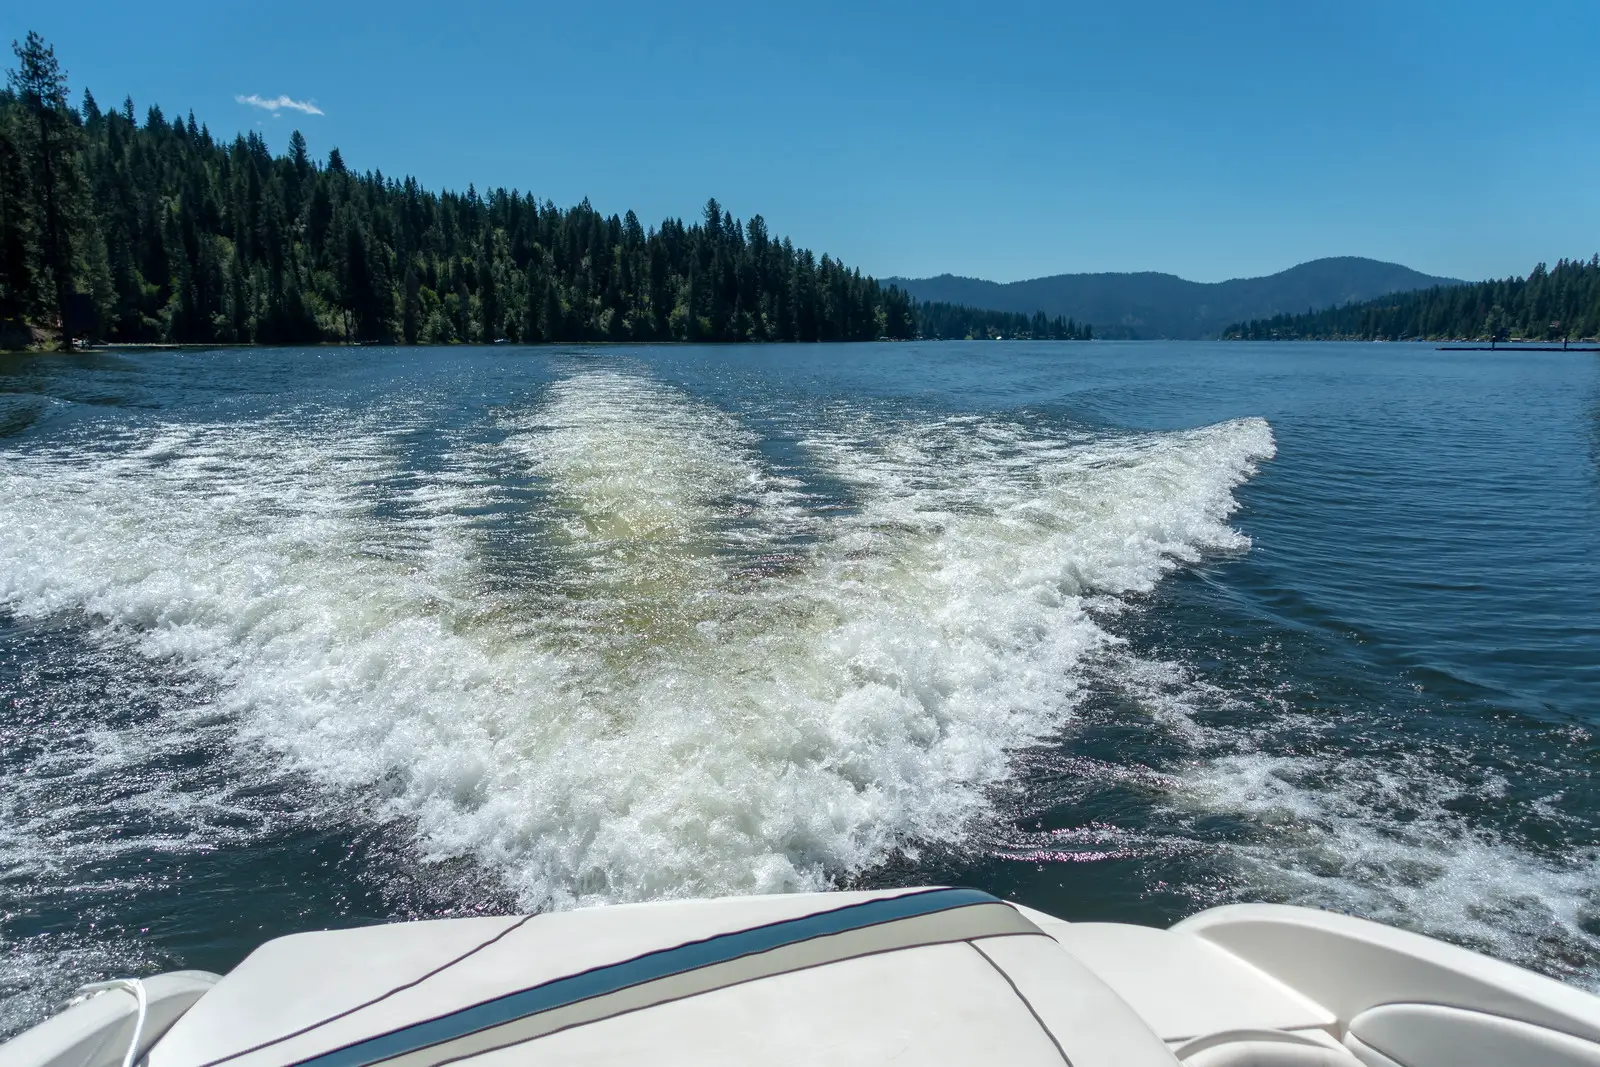 Photo from the back of a boat on Hayden Lake with green pines lining the lake and mountains in the background